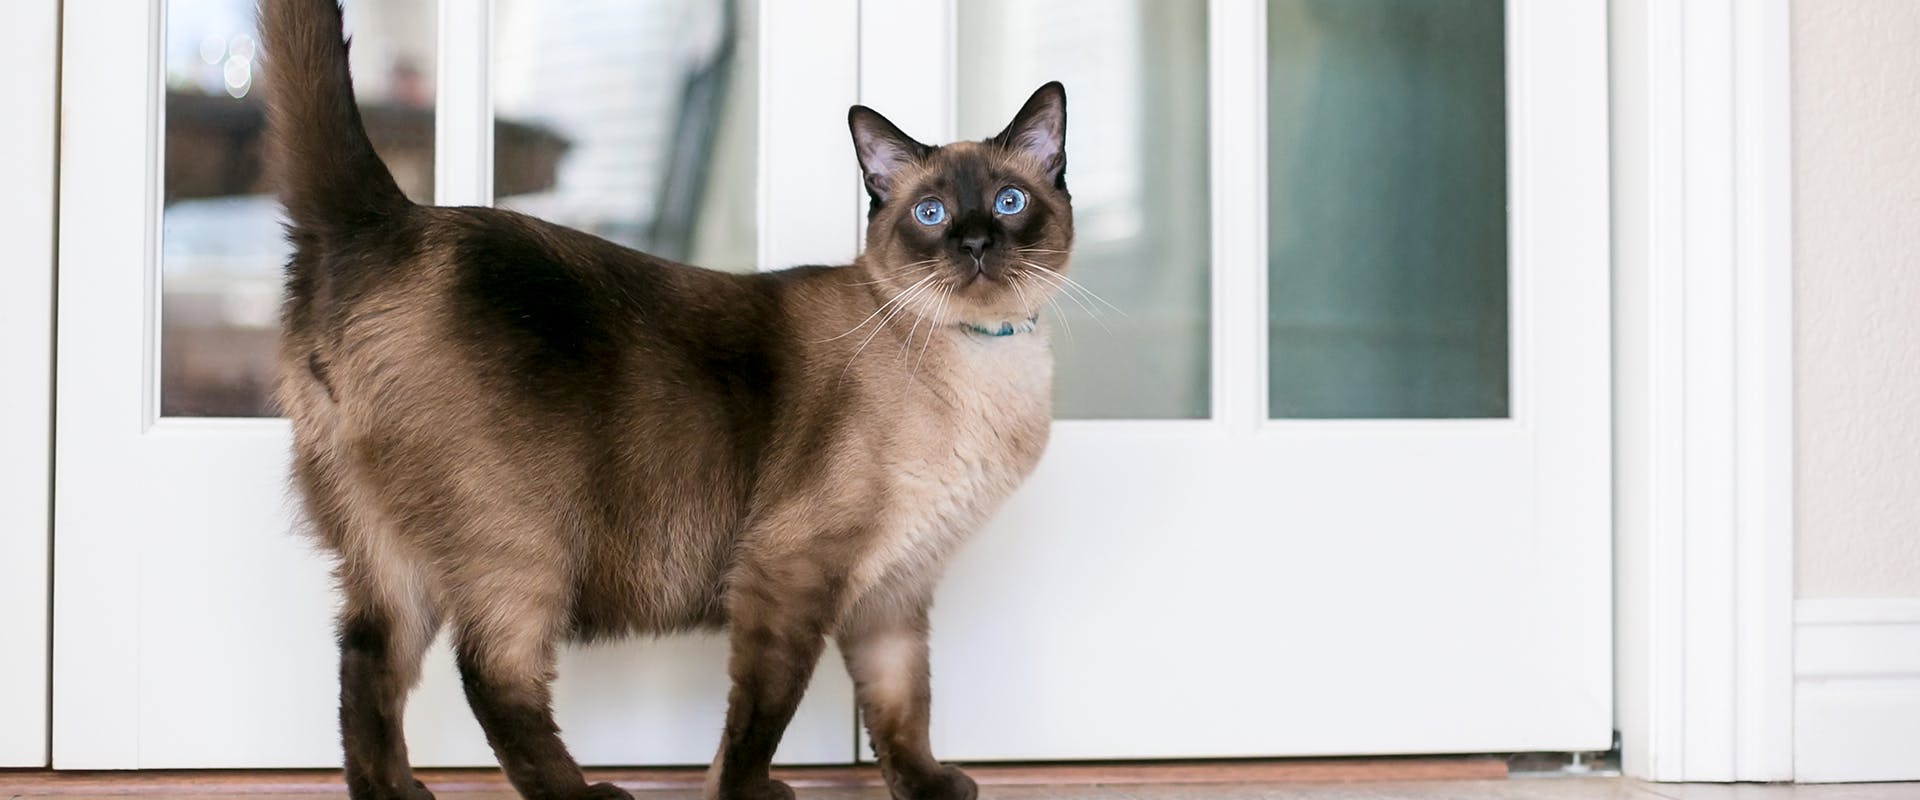 A Siamese cat standing in front of a door in a brightly lit home